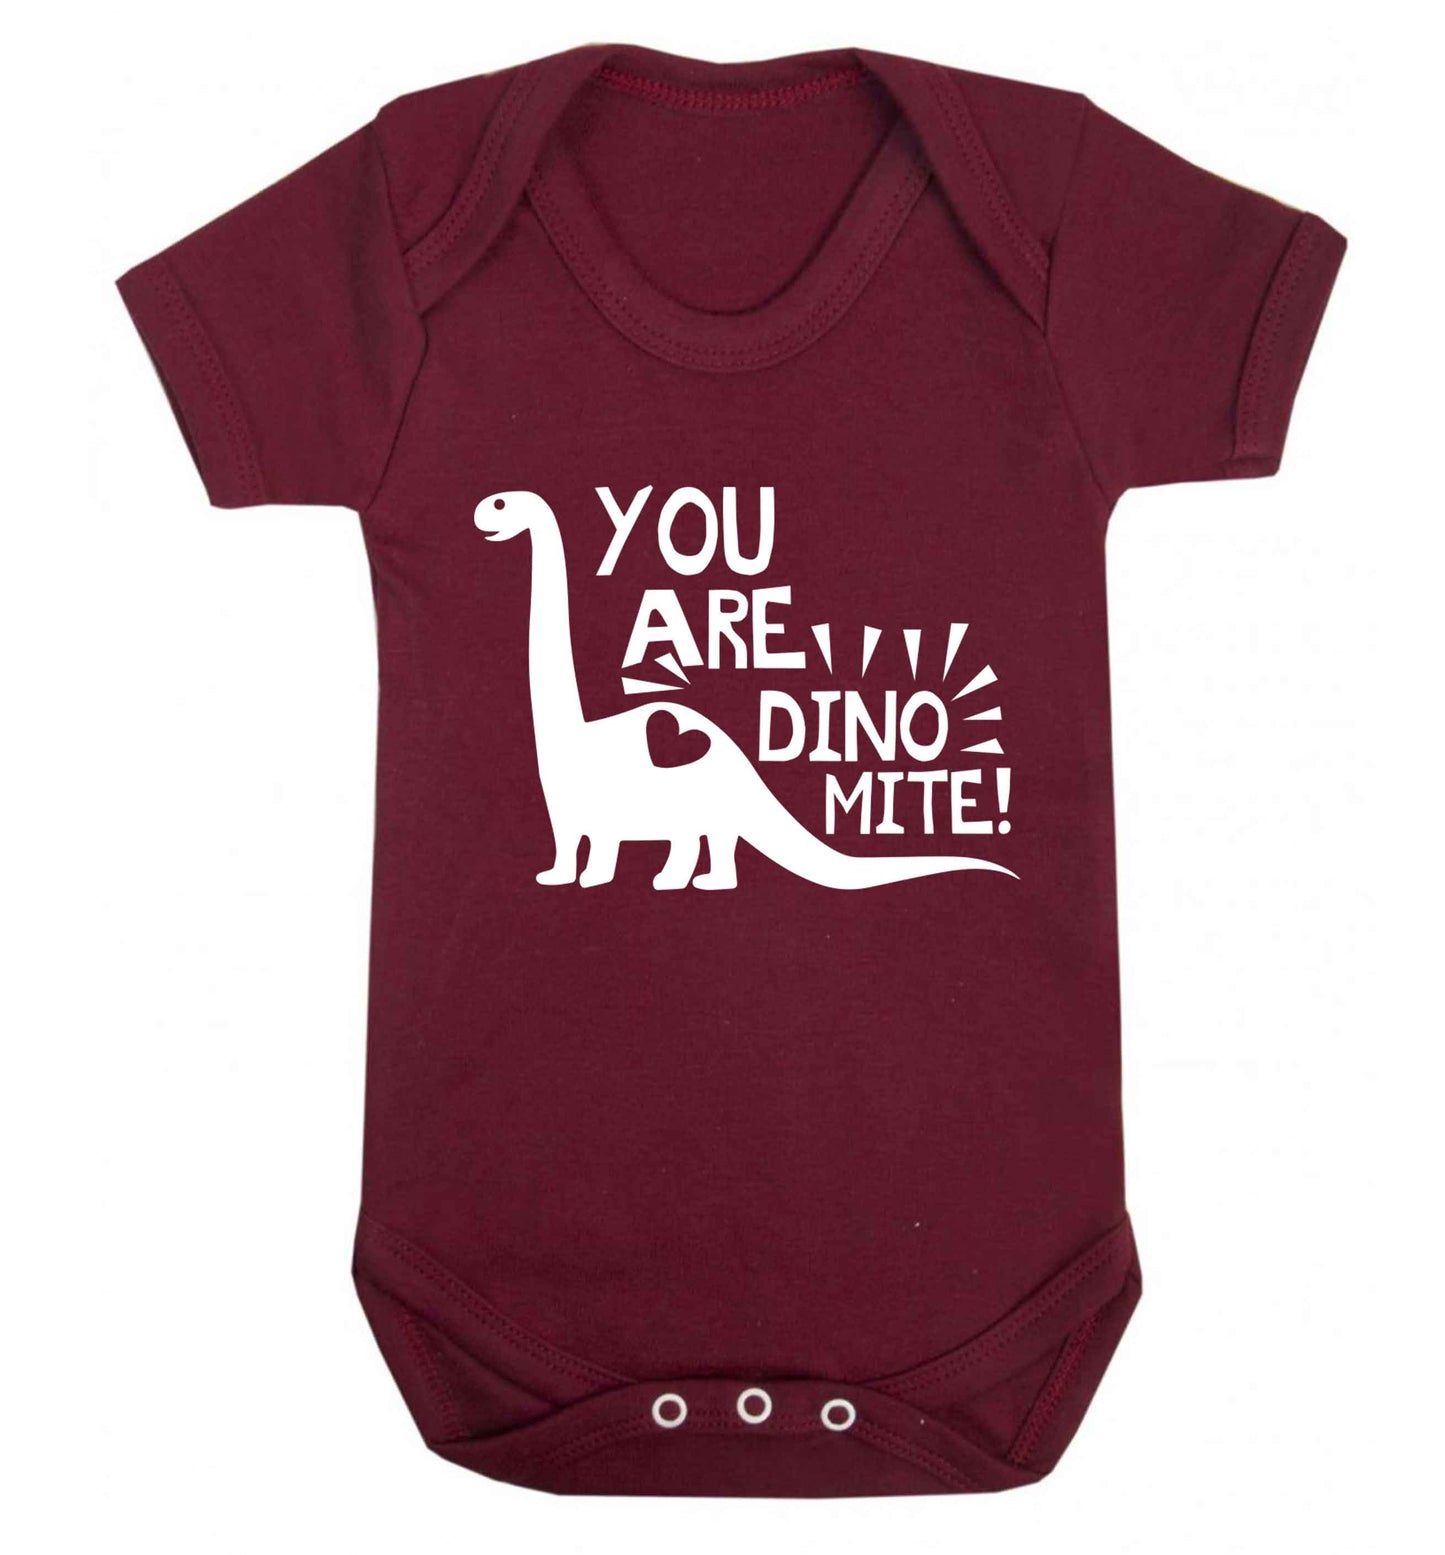 You are dinomite! Baby Vest maroon 18-24 months